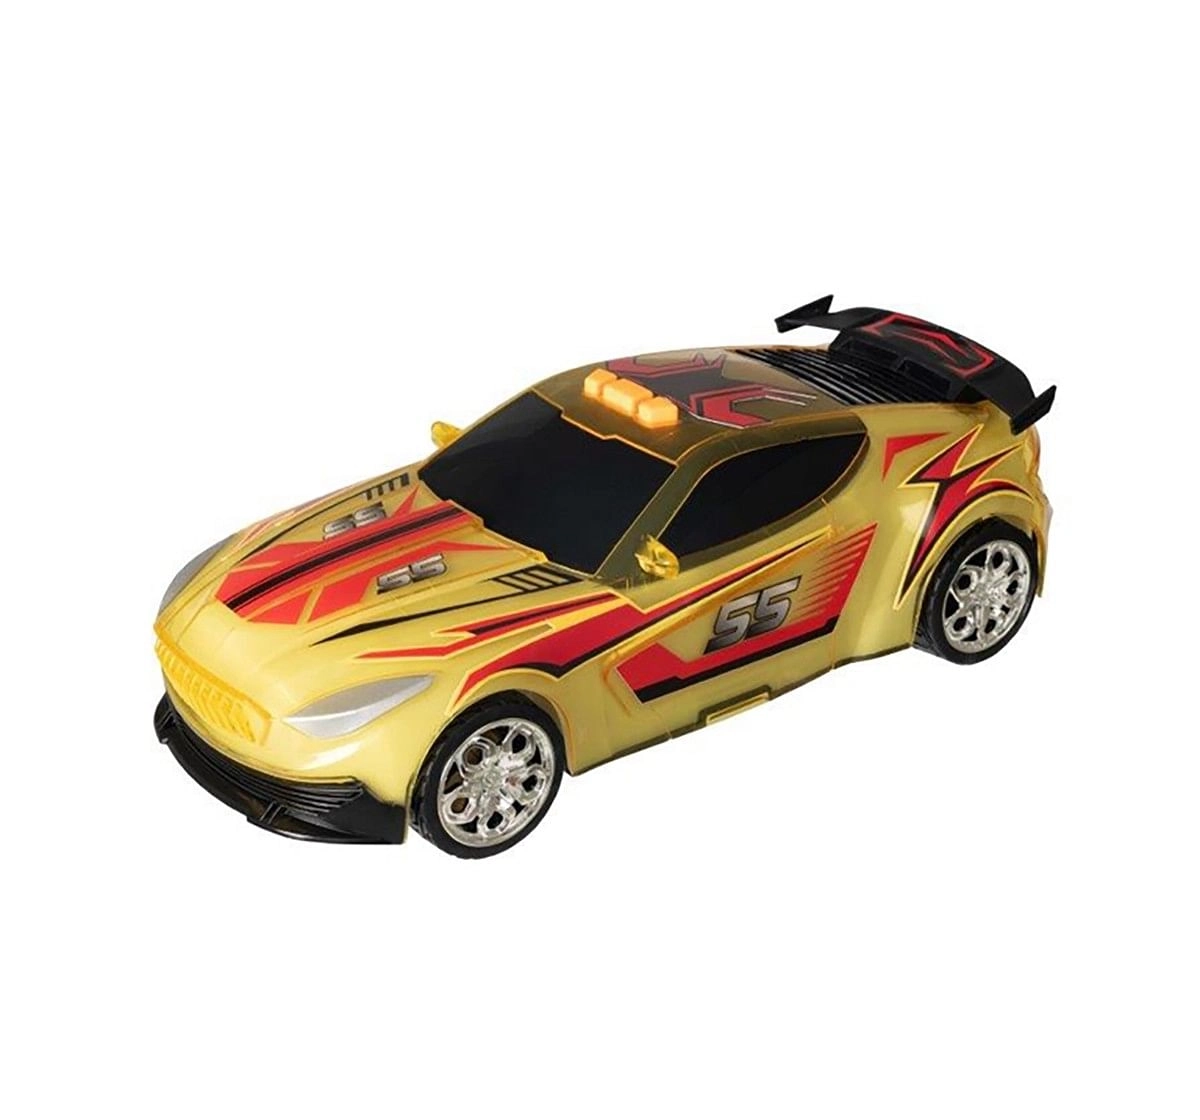 Teamsterz Light And Sound Street Starz Yellow Orange Car Vehicles for Kids age 3Y+ 